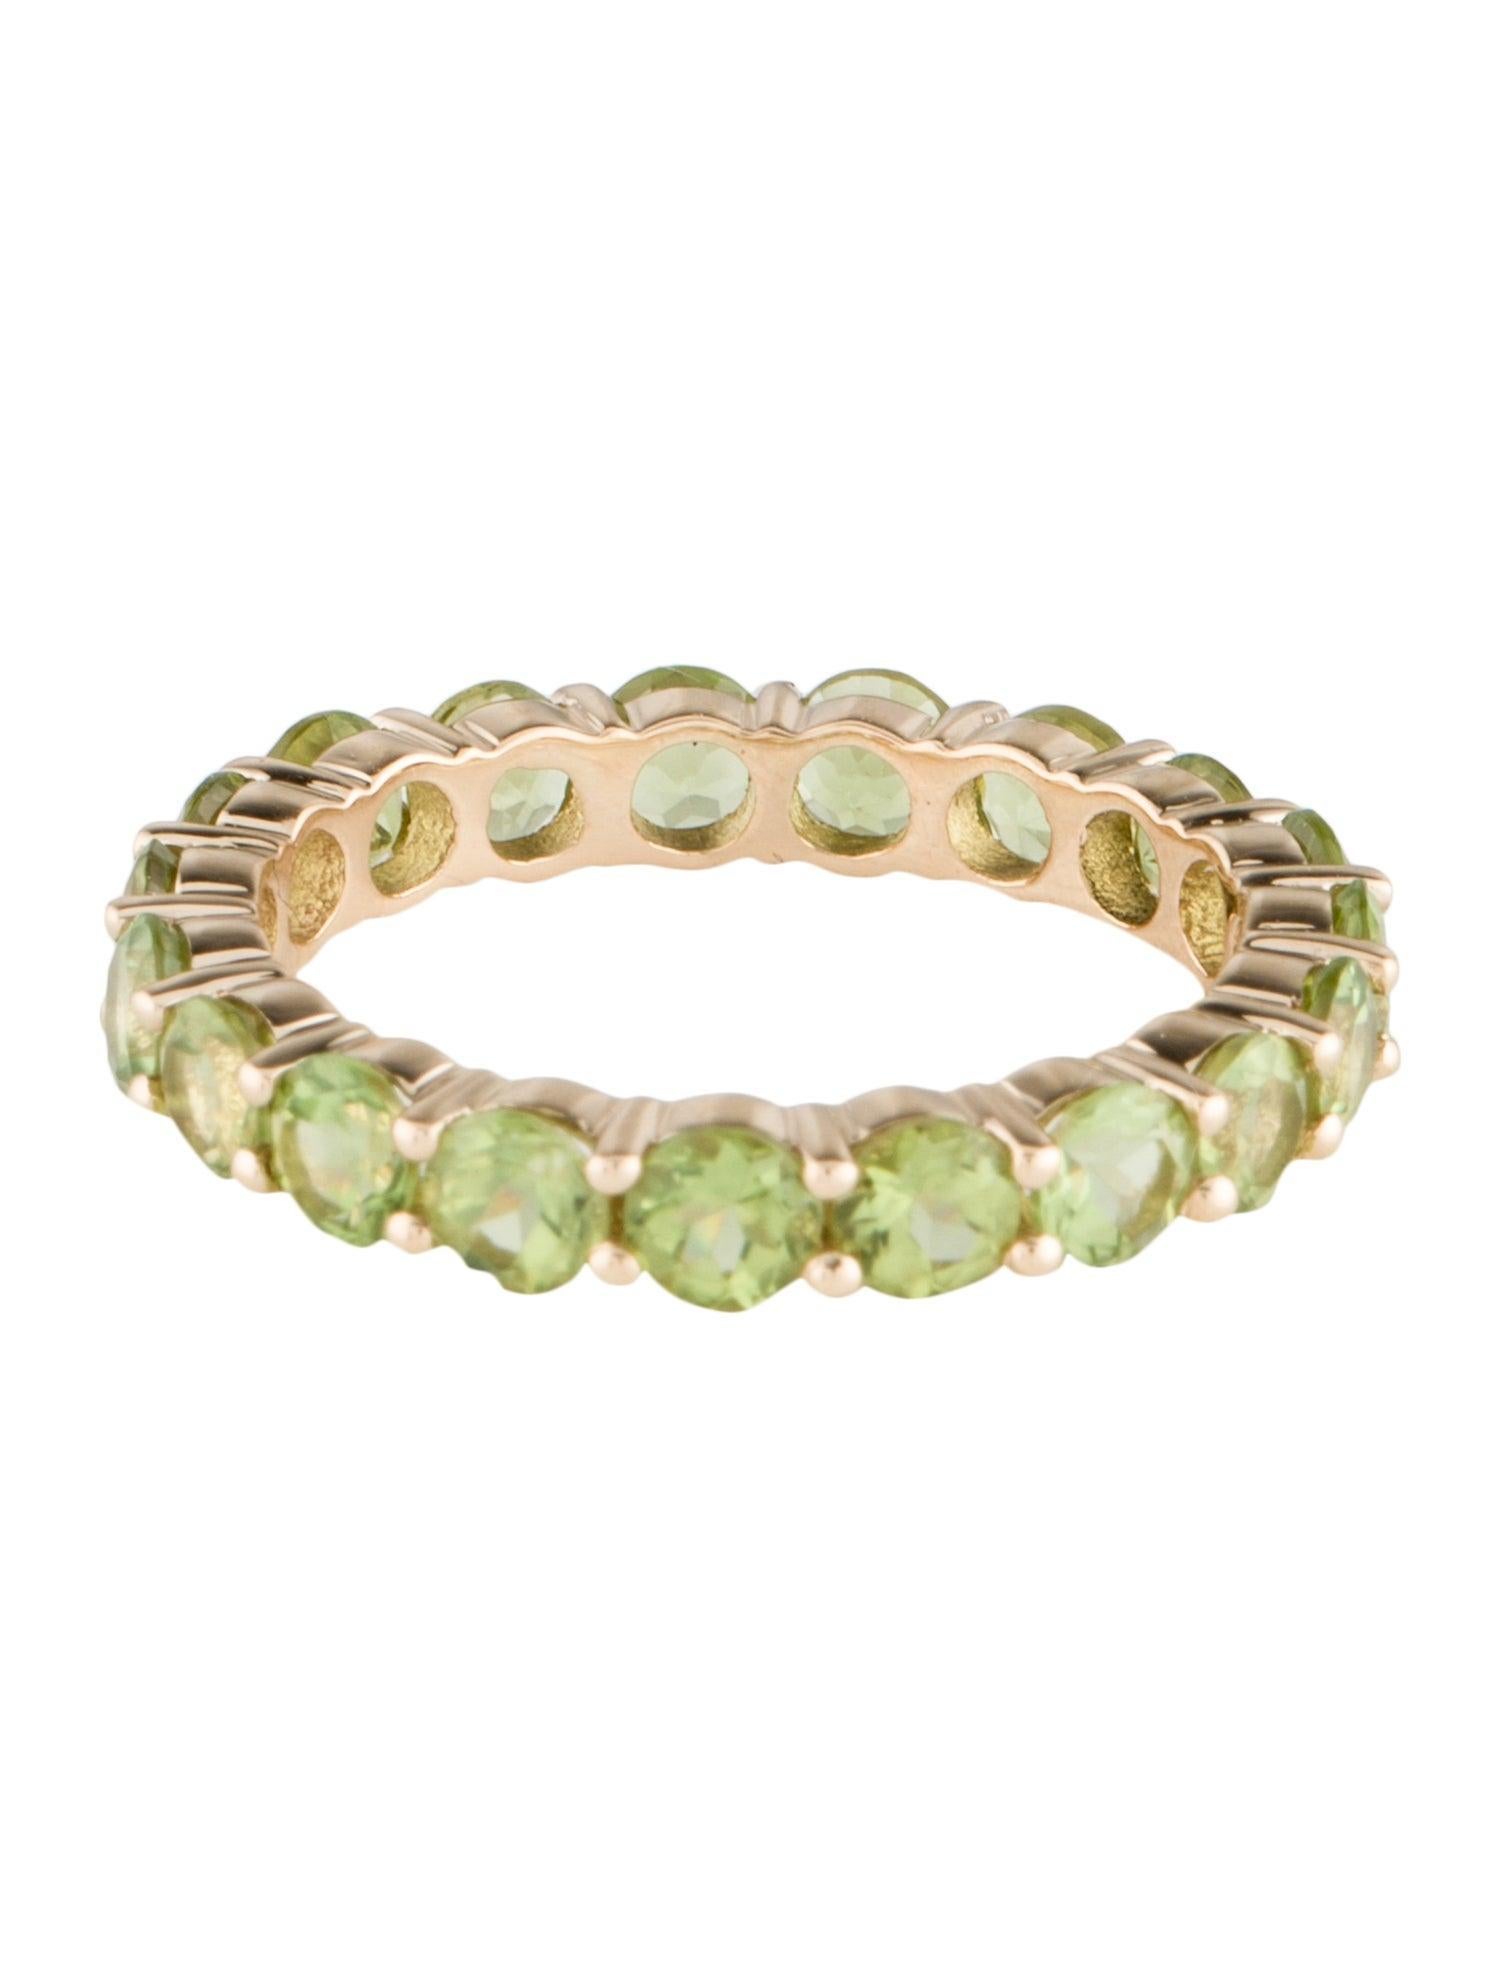  Elegant 14K Yellow Gold Peridot Eternity Band with Faceted Round Peridots In New Condition For Sale In Holtsville, NY